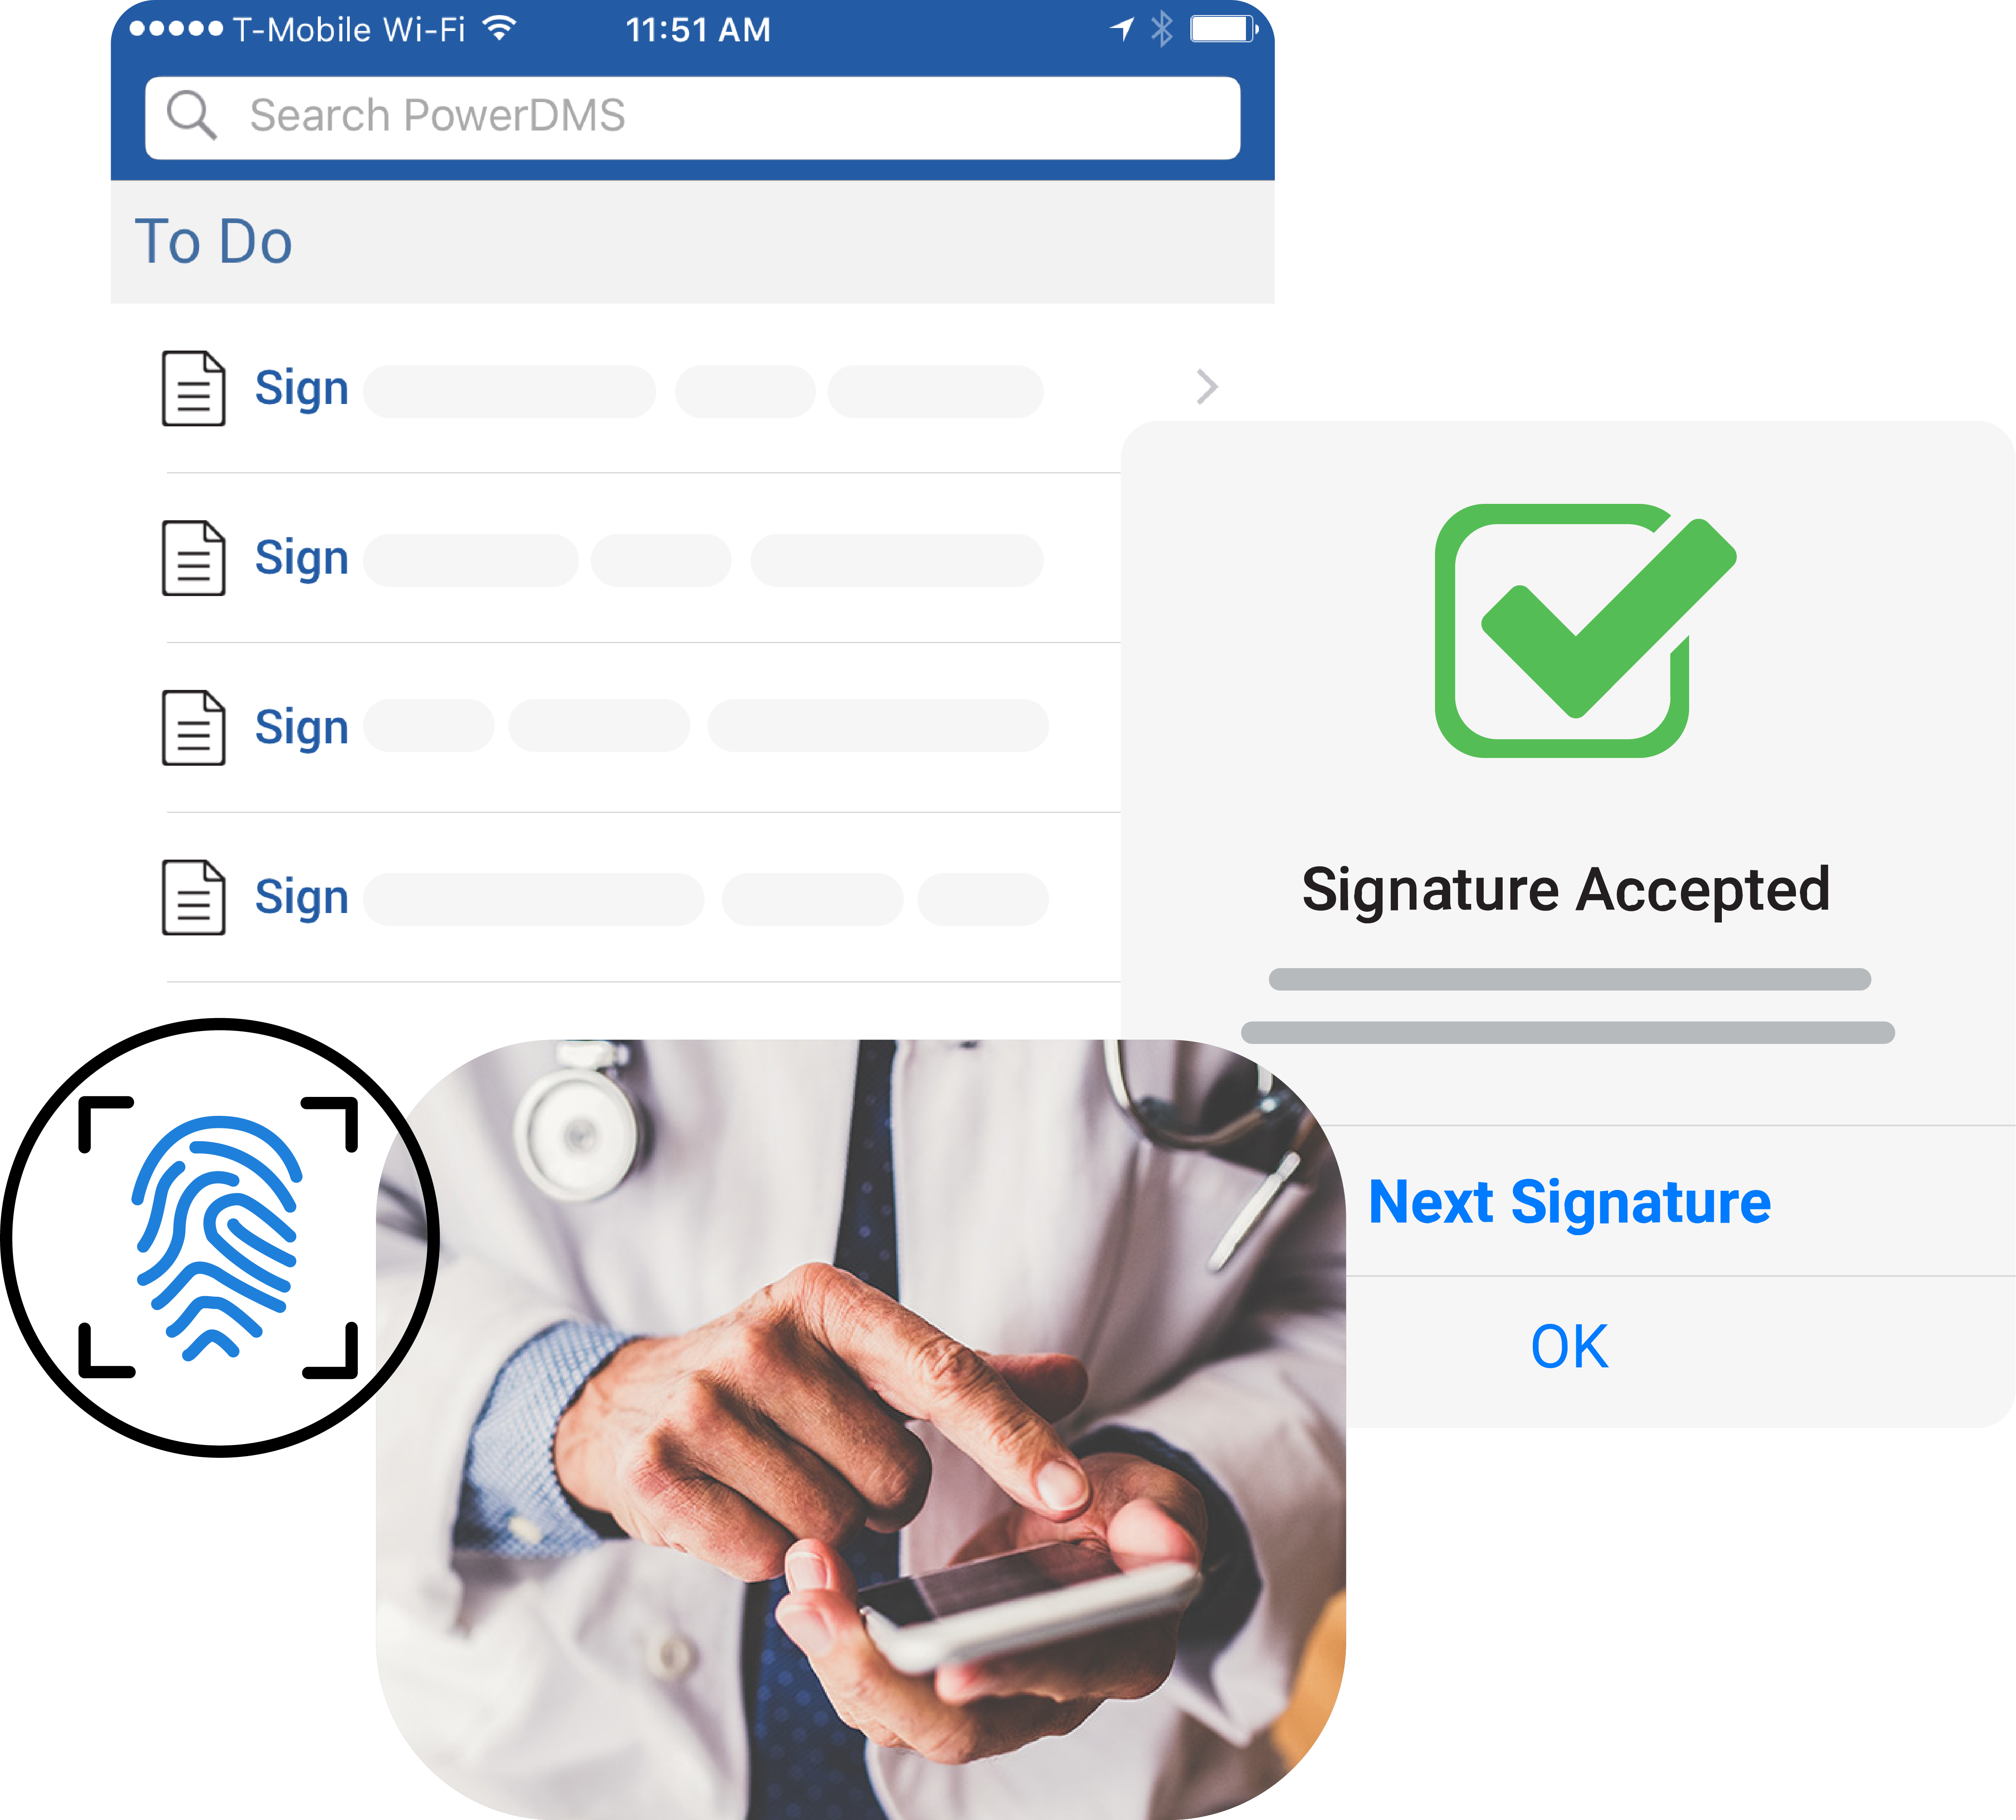 Hold employees accountable to important documents by capturing and tracking E-signatures.